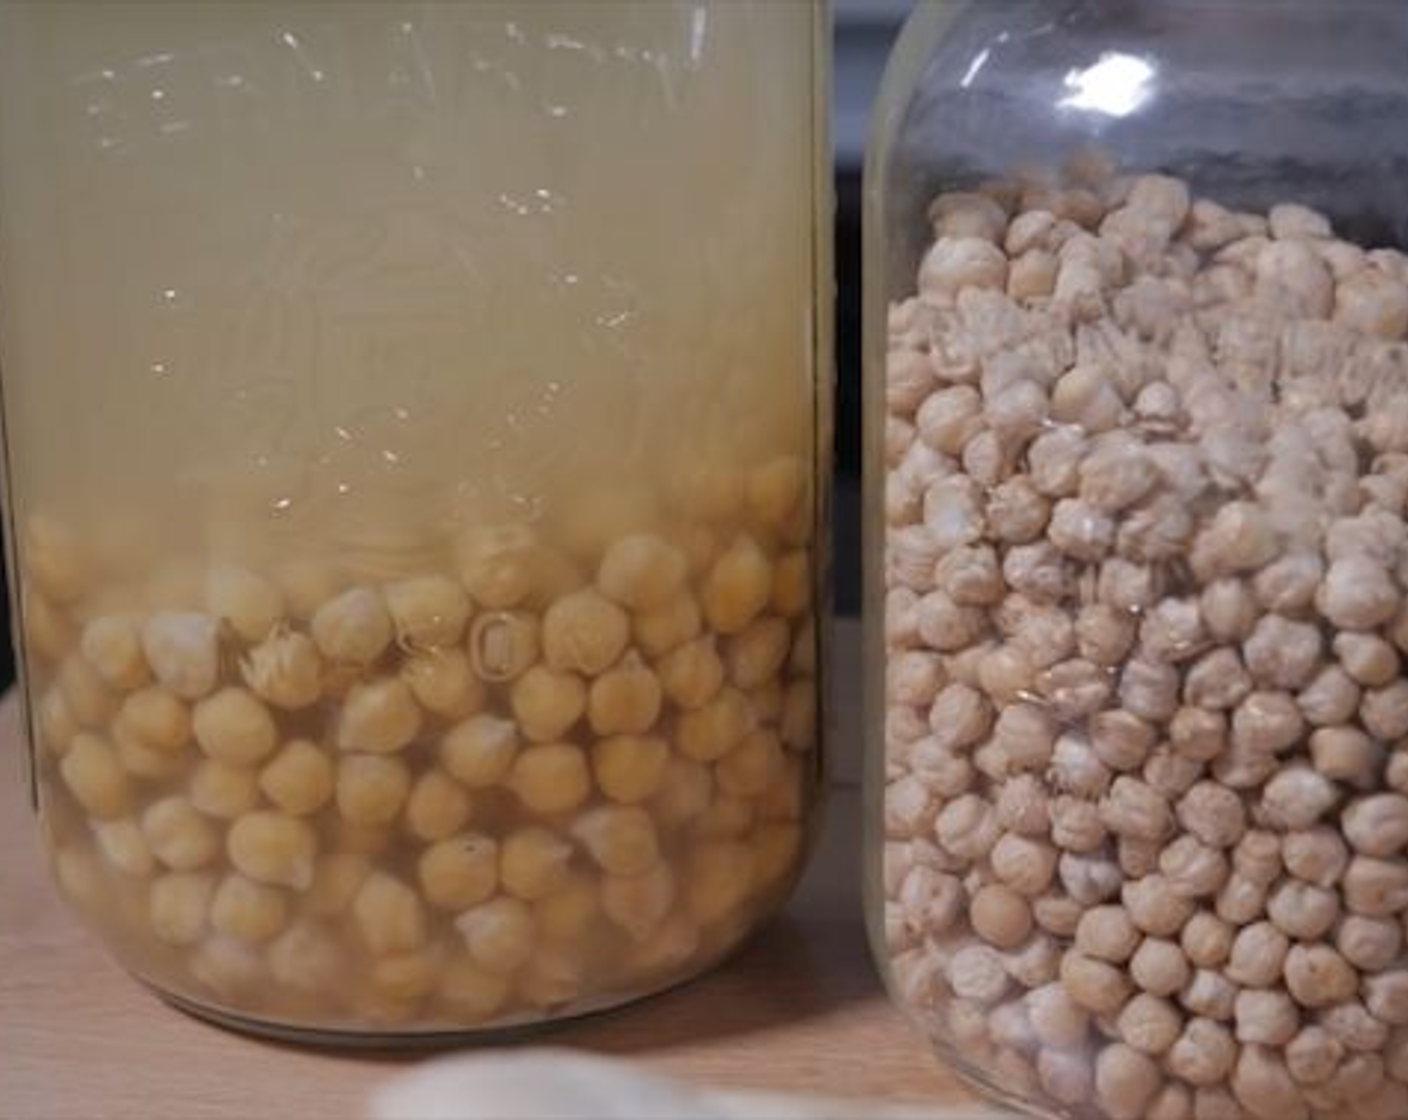 step 1 Soak Dried Chickpeas (1 cup) overnight by placing dried chickpeas, Sea Salt (1 Tbsp), Baking Soda (1 tsp), and 4 cups of water in a large container.